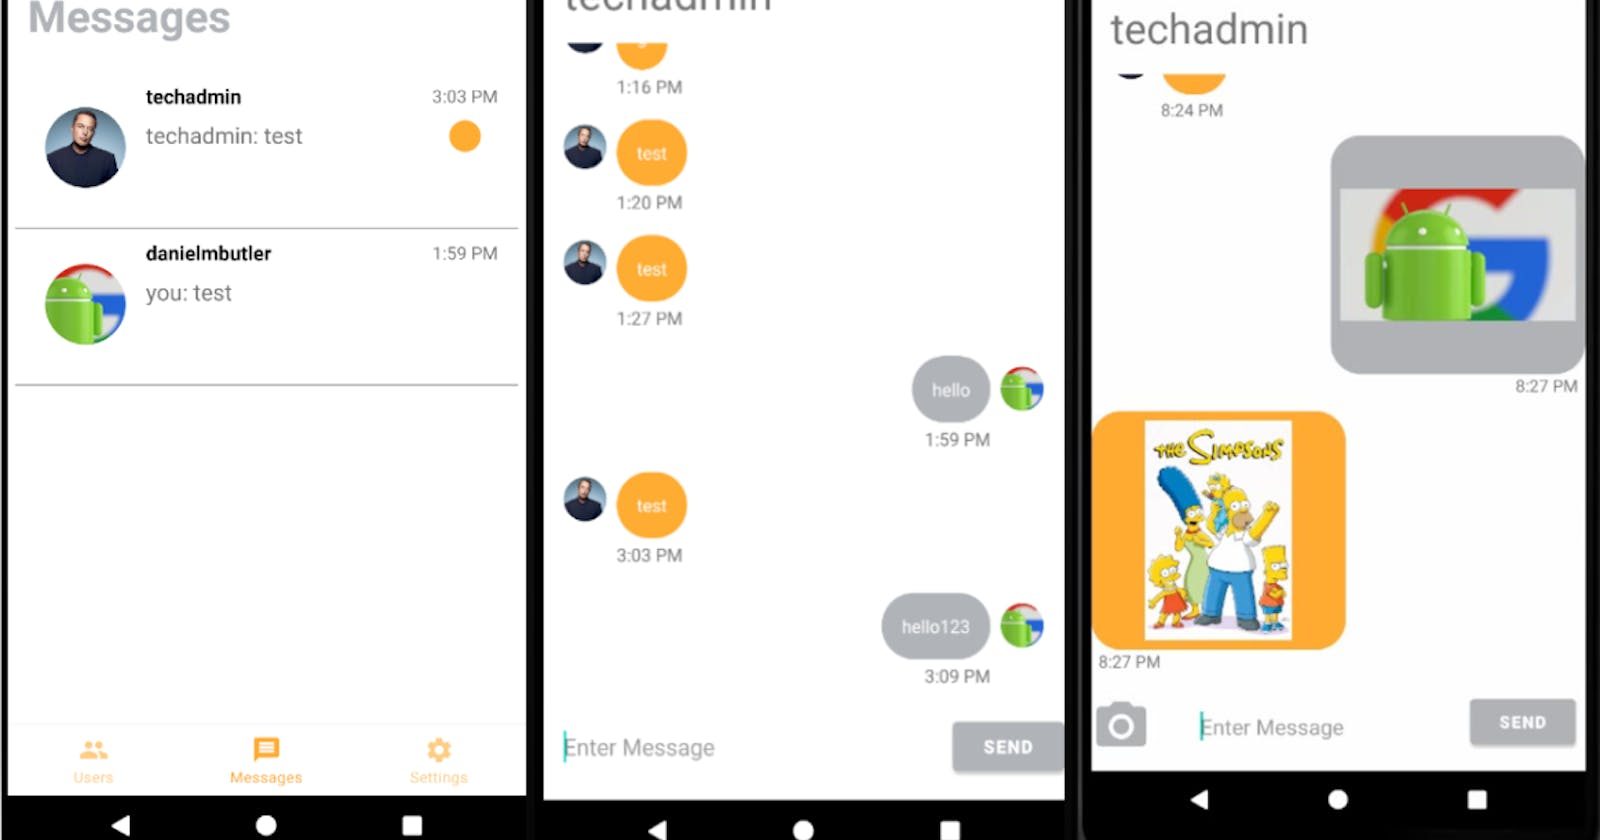 Building a Messenger App on Android using AWS Amplify